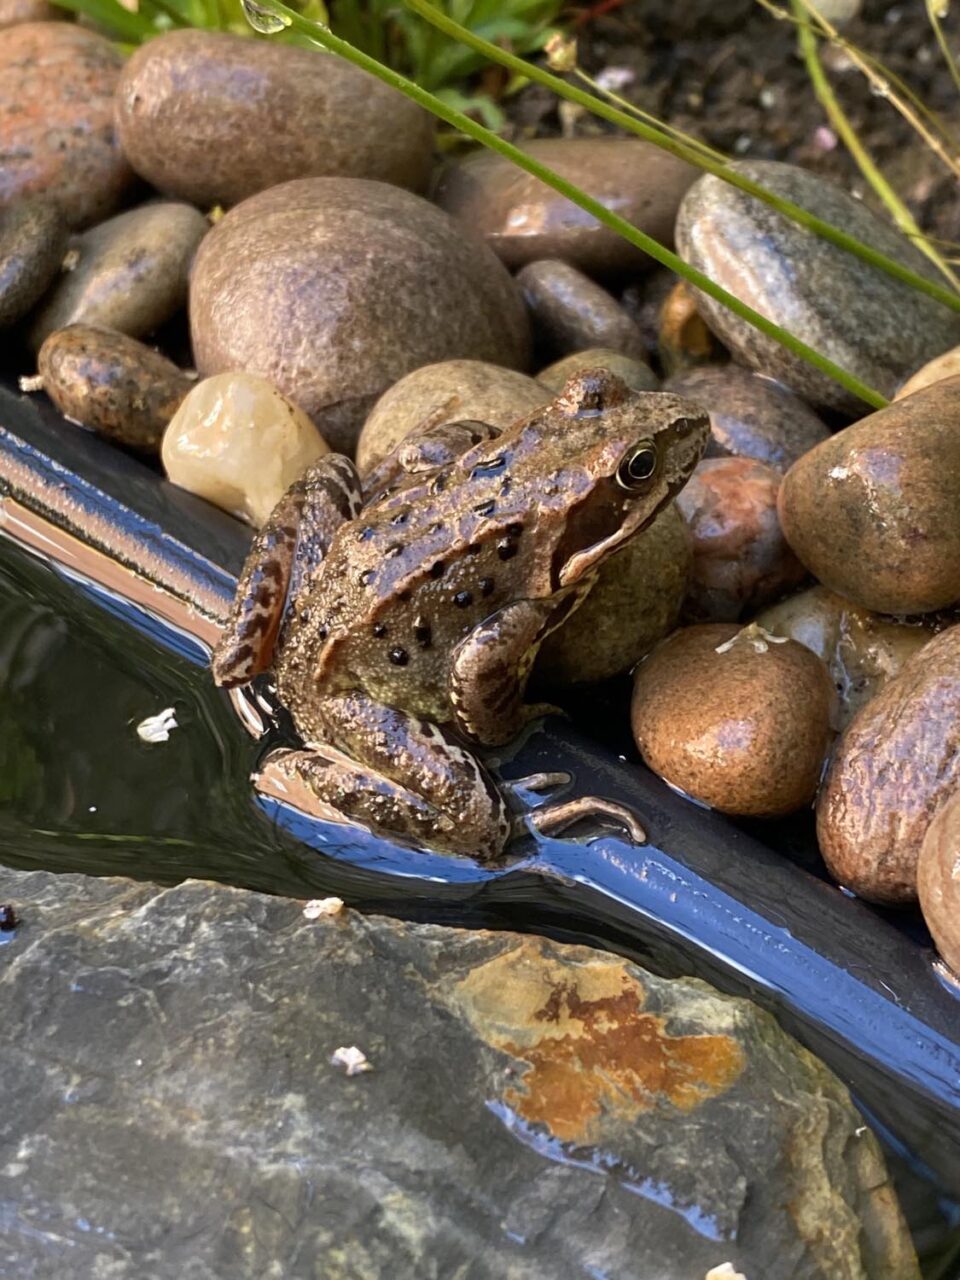 a frog in our wildlife pond